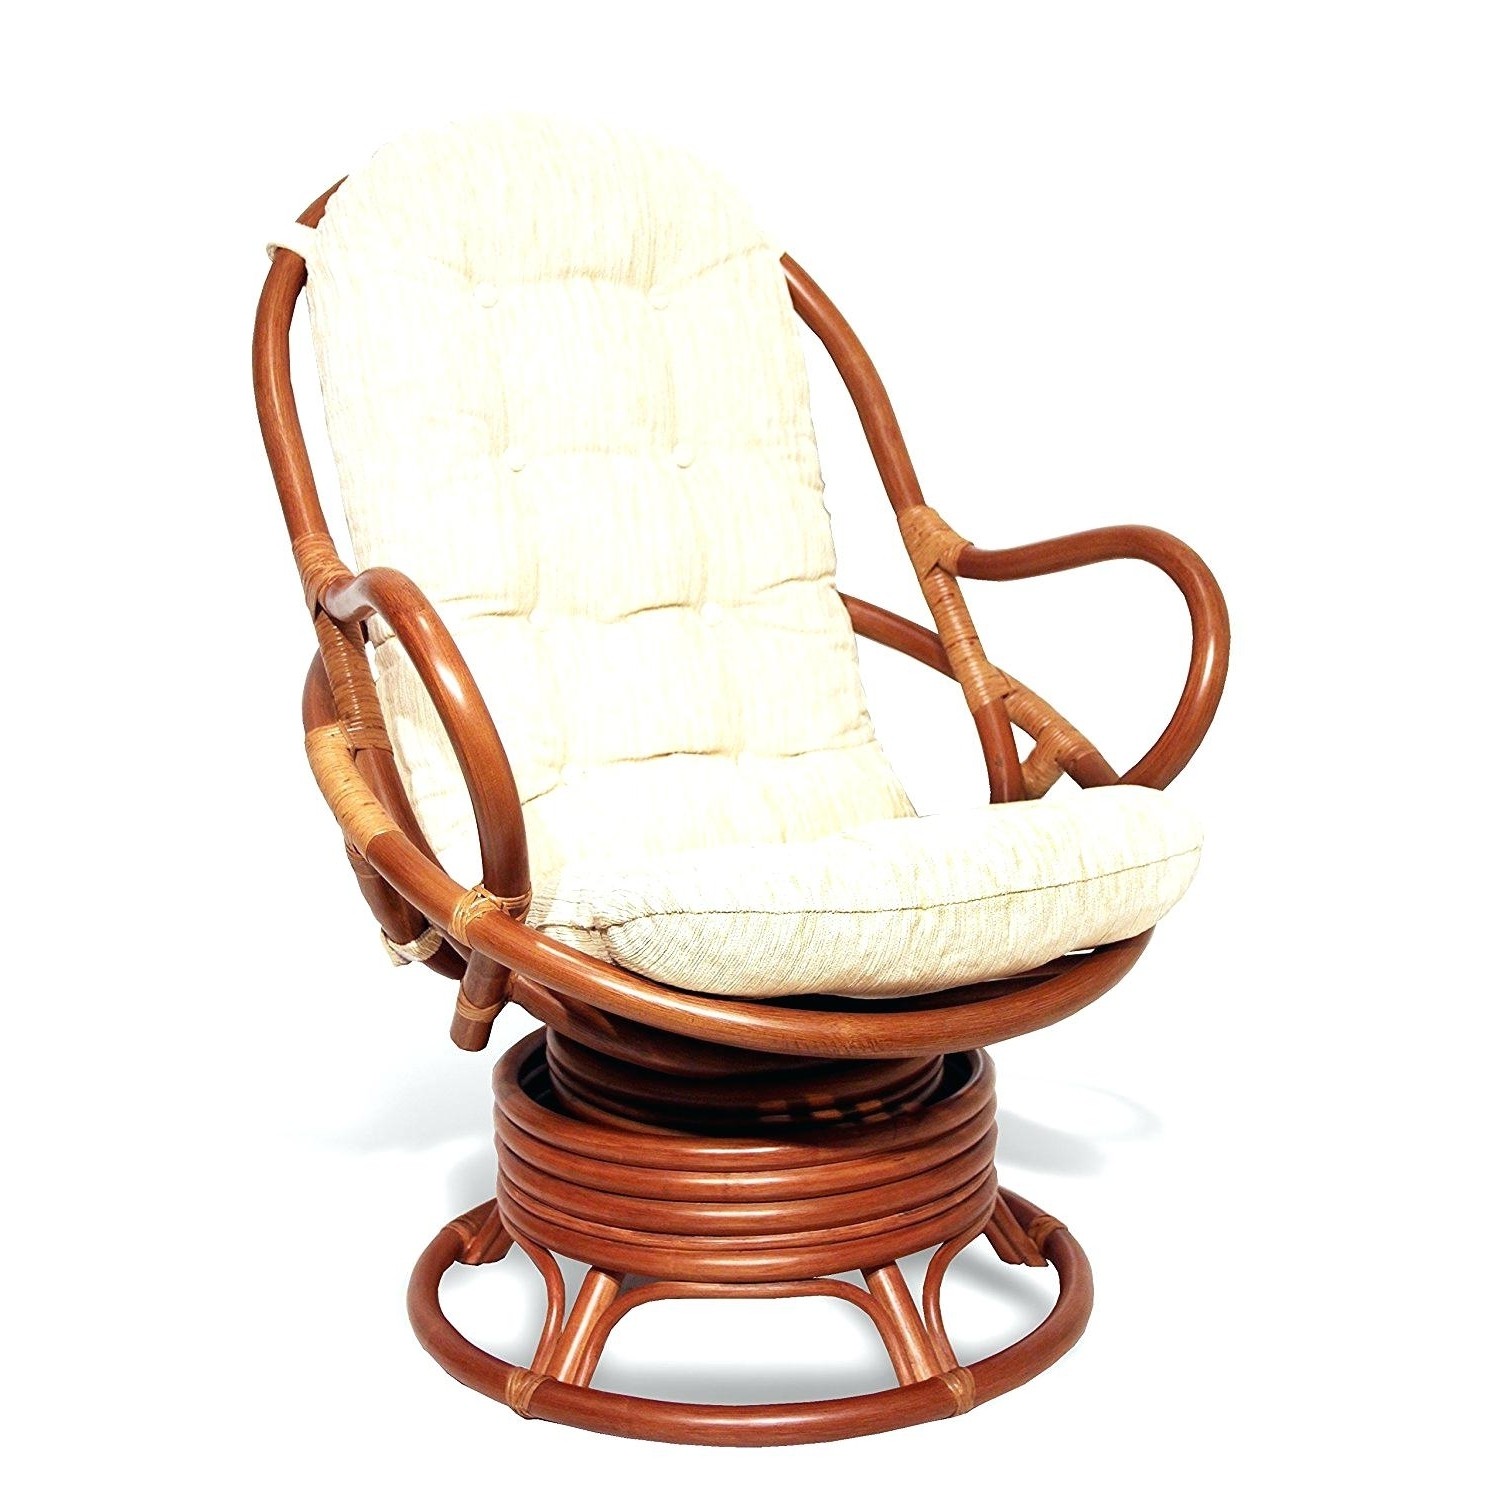 Java Swivel Rocking Chair Colonial with Cushion Handmade Natural Wicker Rattan Furniture